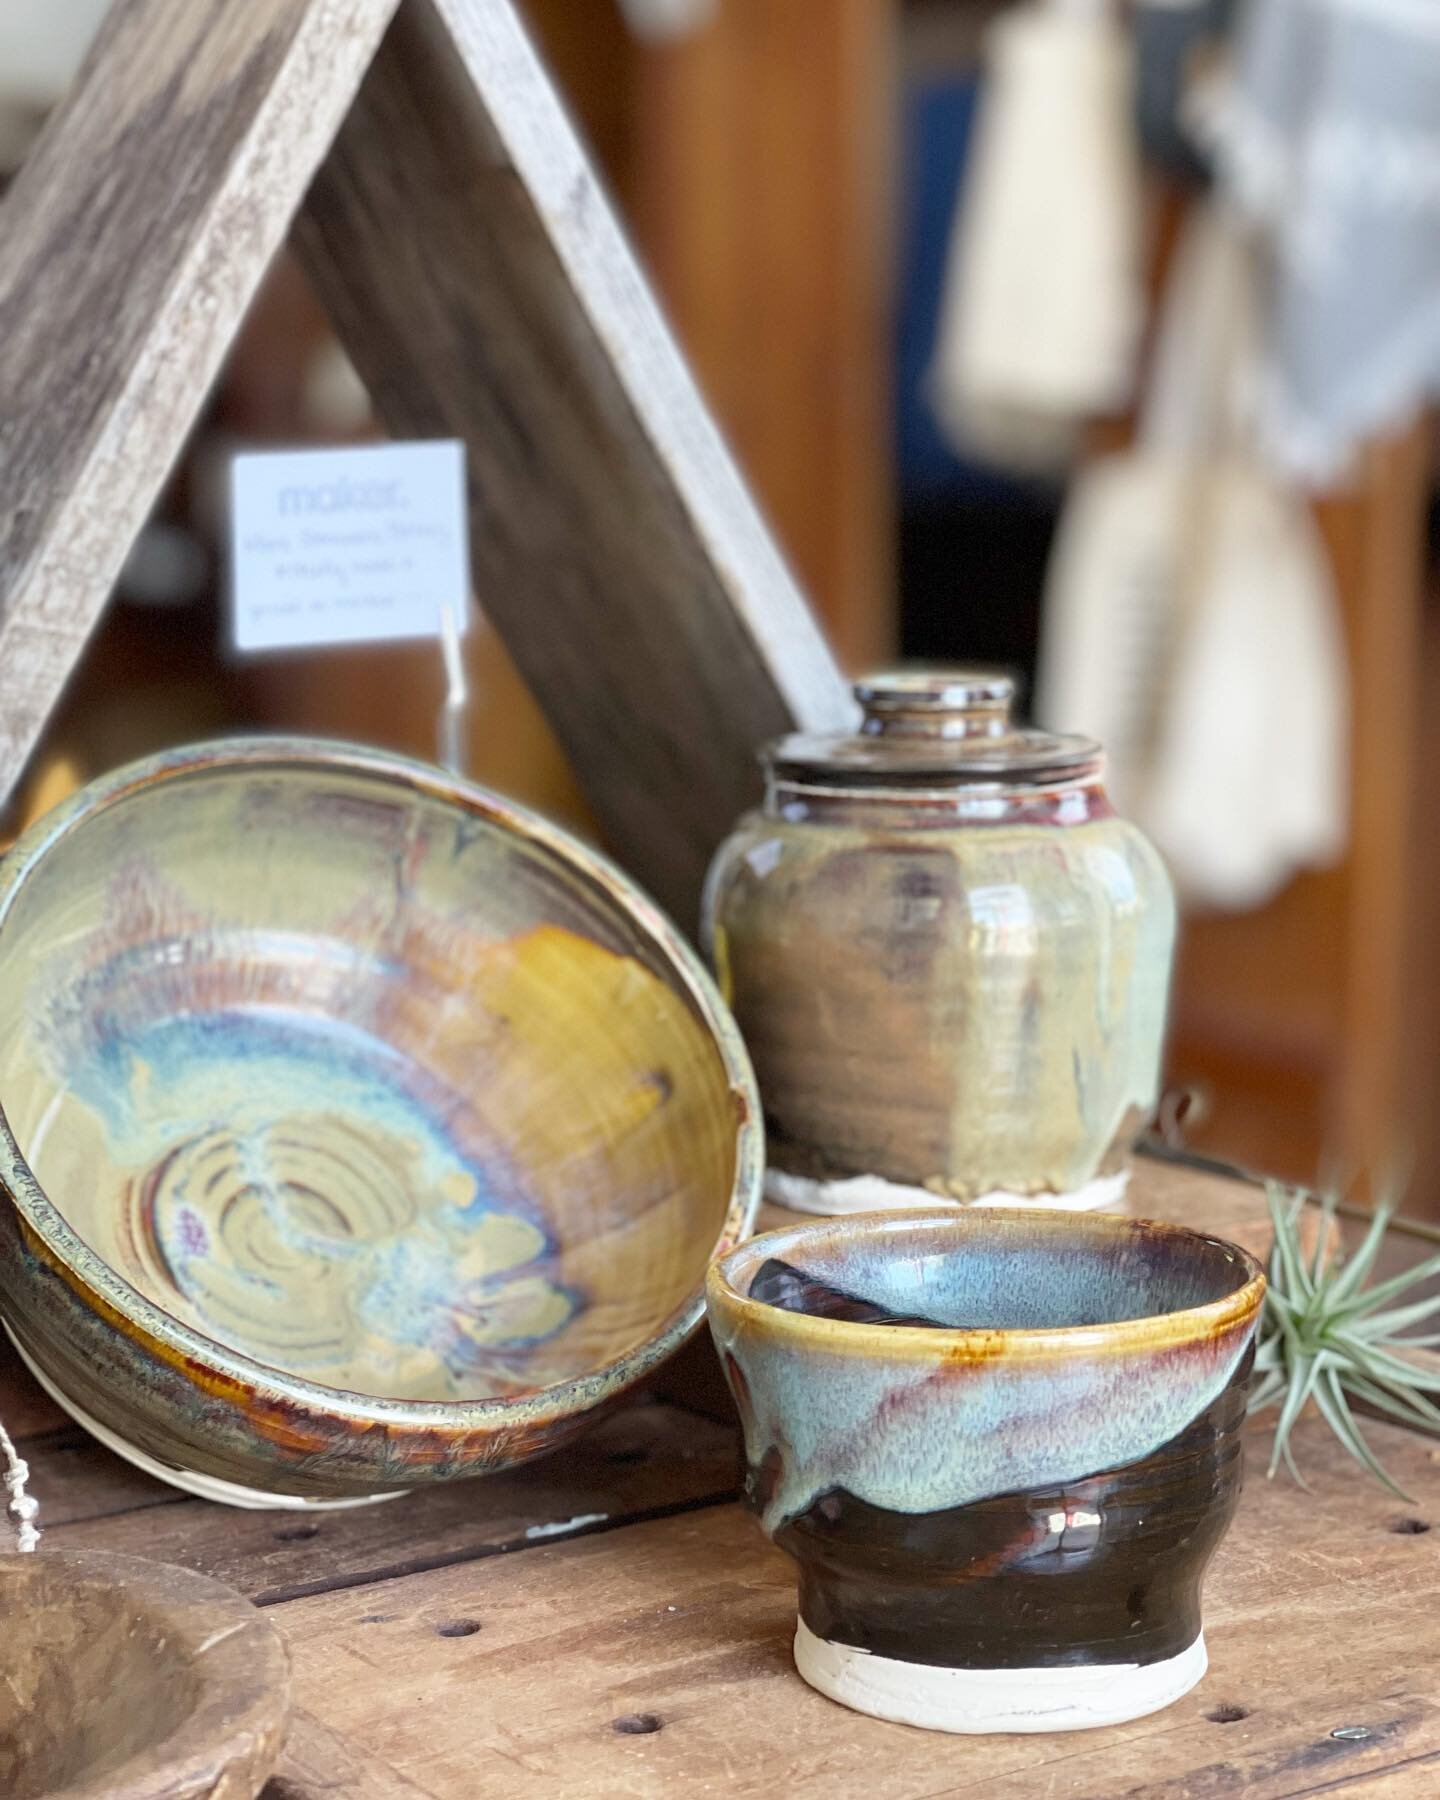 We are thrilled to be carrying a few gorgeous pieces by local potter @marsstoneware 😍. These glazes! Open Th-Sun 11-5, highlighting local and American-made goods always. #generalstore #mercantile #lakecountyca #visitkelseyville #shoplocal #shopsmall